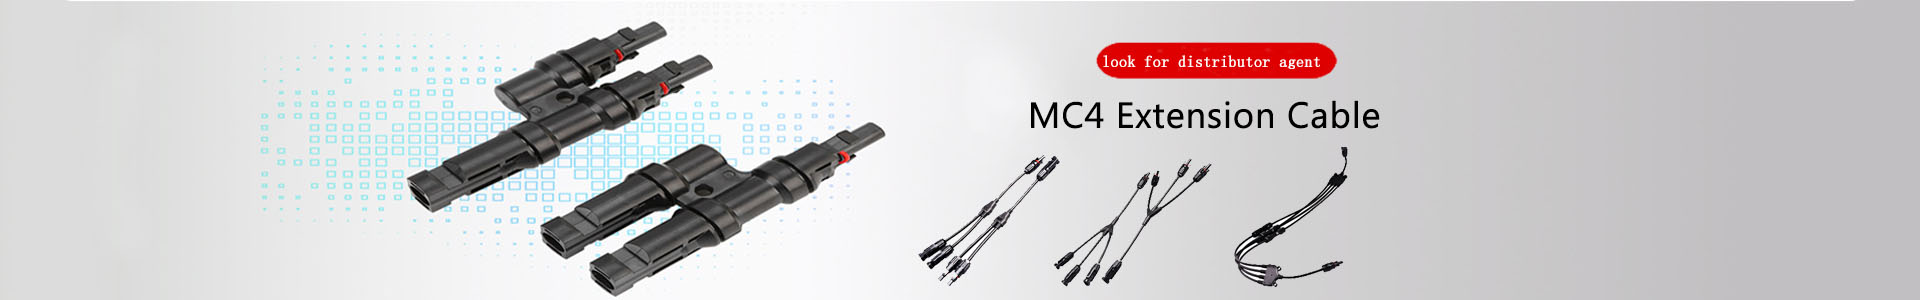 genuine mc4 connector-Solar Connector-Solar | solar connector,solar branch connector,diode fuse connector,MC4 extnsion cable,H1Z2Z2 solar cable, UL4703 solar cable | Leading manufacturer and supplier of solar pv cables and connectors